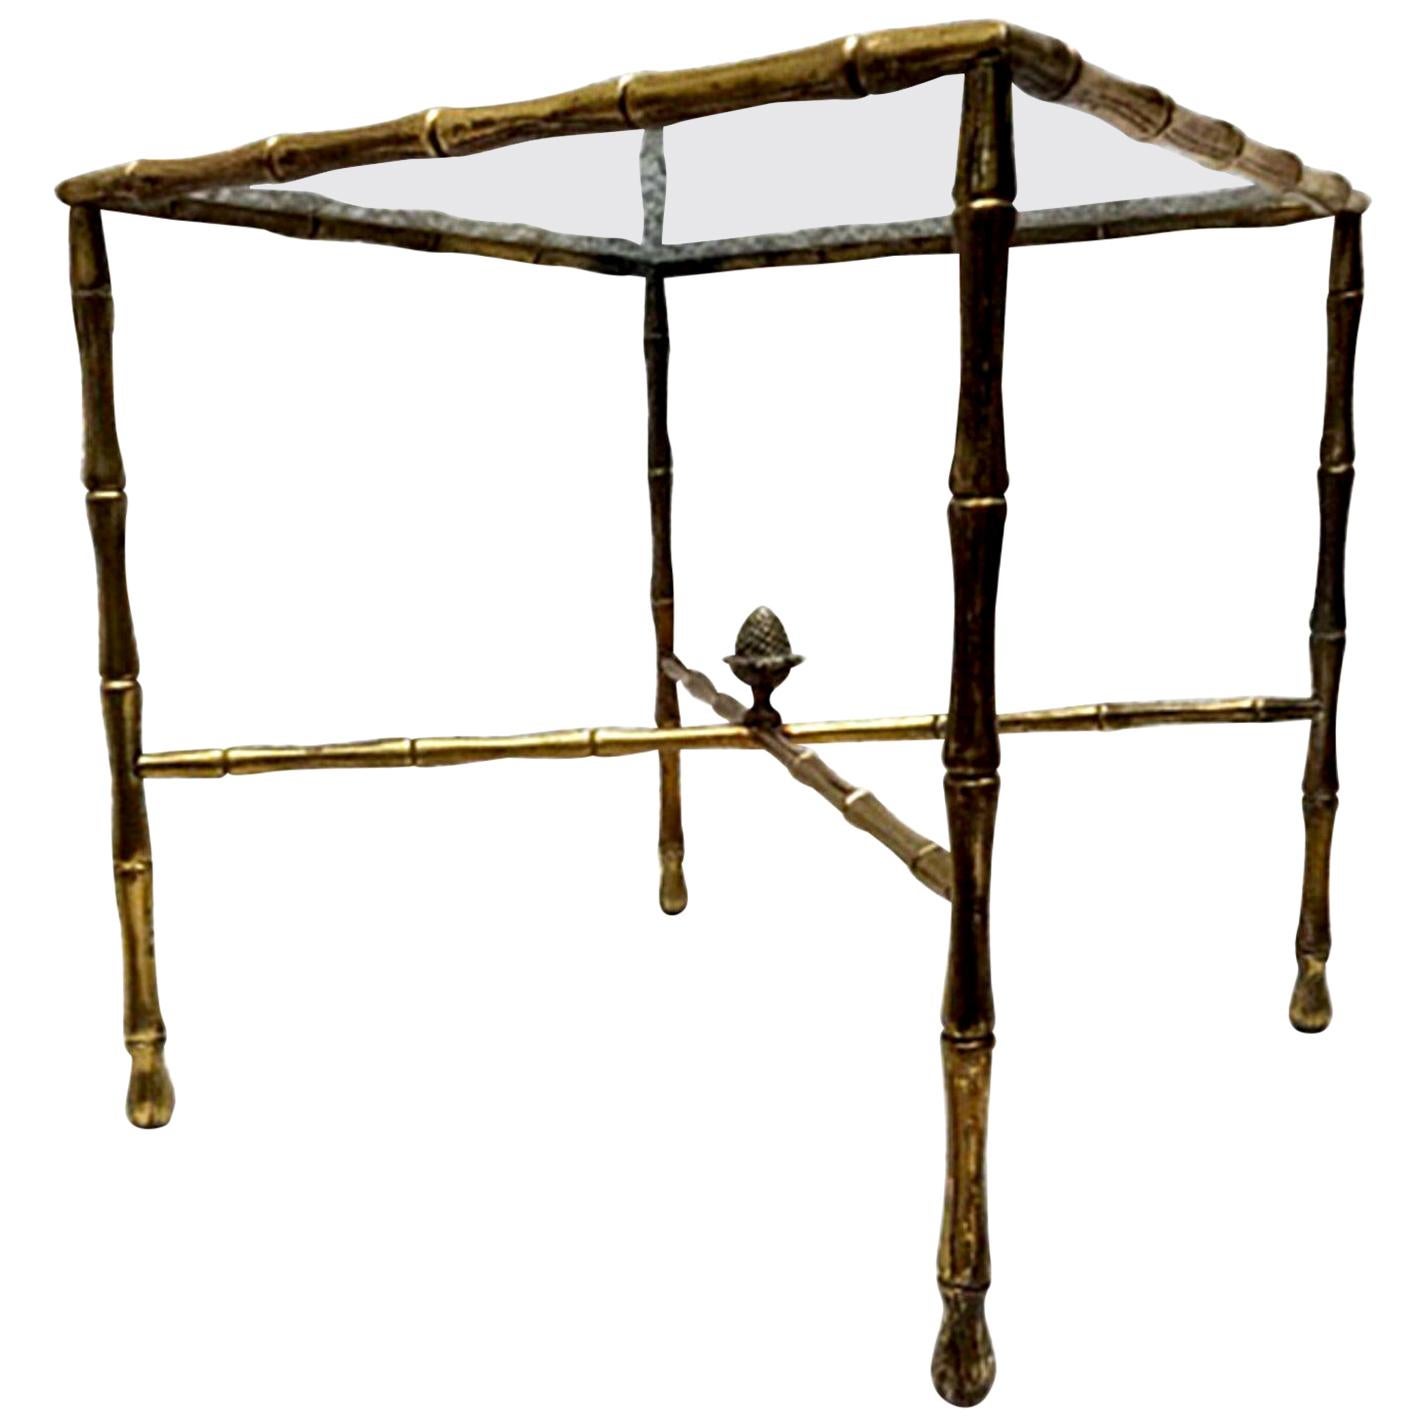 AMBIANIC presents
Glamorous Square Side table in brass faux bamboo by Arturo Pani.
Mexico circa 1950s. Designer Arturo Pani.
 H 19.5 in. x W 19.75 in. x D 19.75 in.
Original vintage preowned condition with new glass top.
Very elegant presentation.
